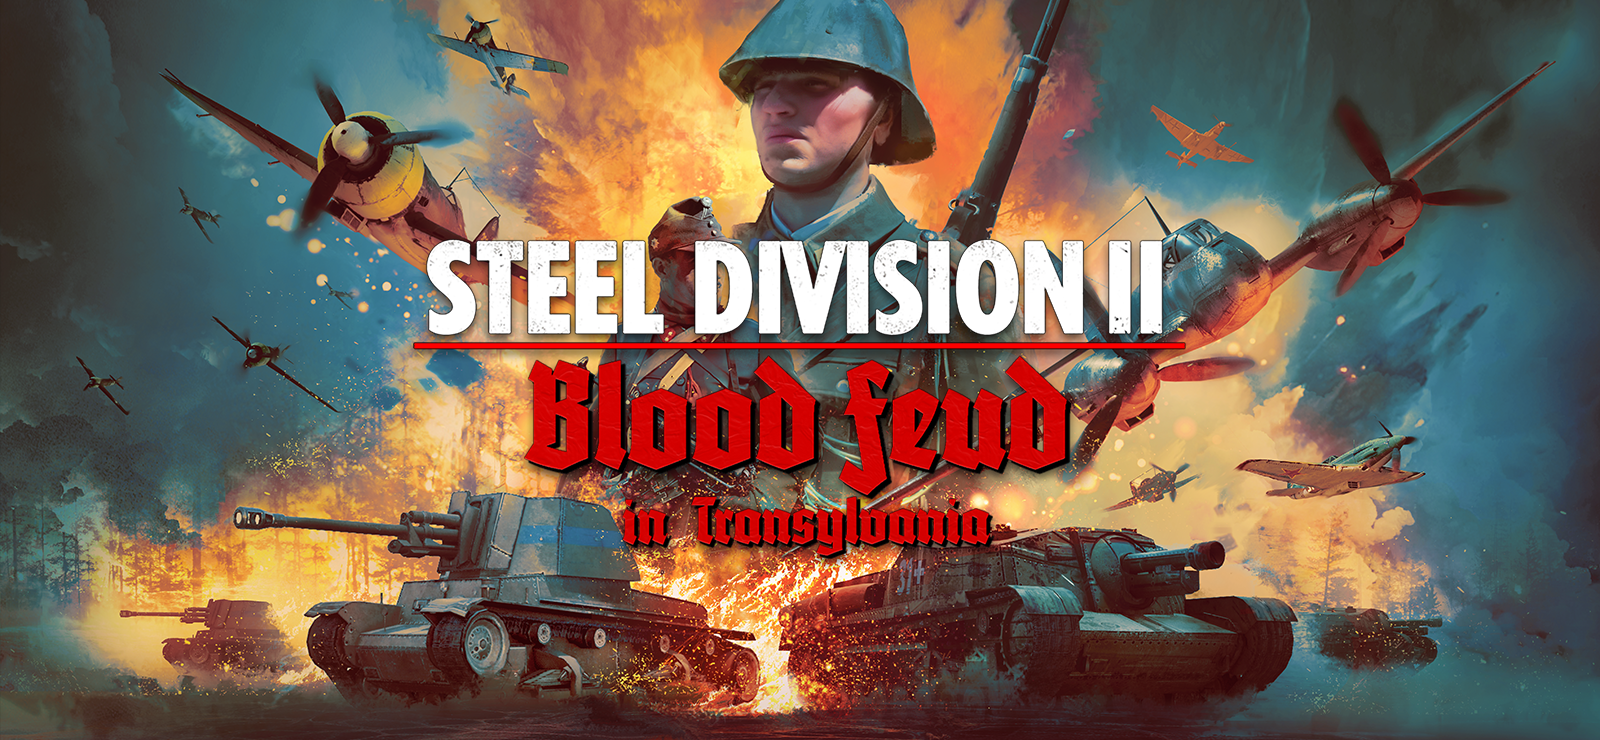 Steel Division 2 - Blood Feud In Transylvania